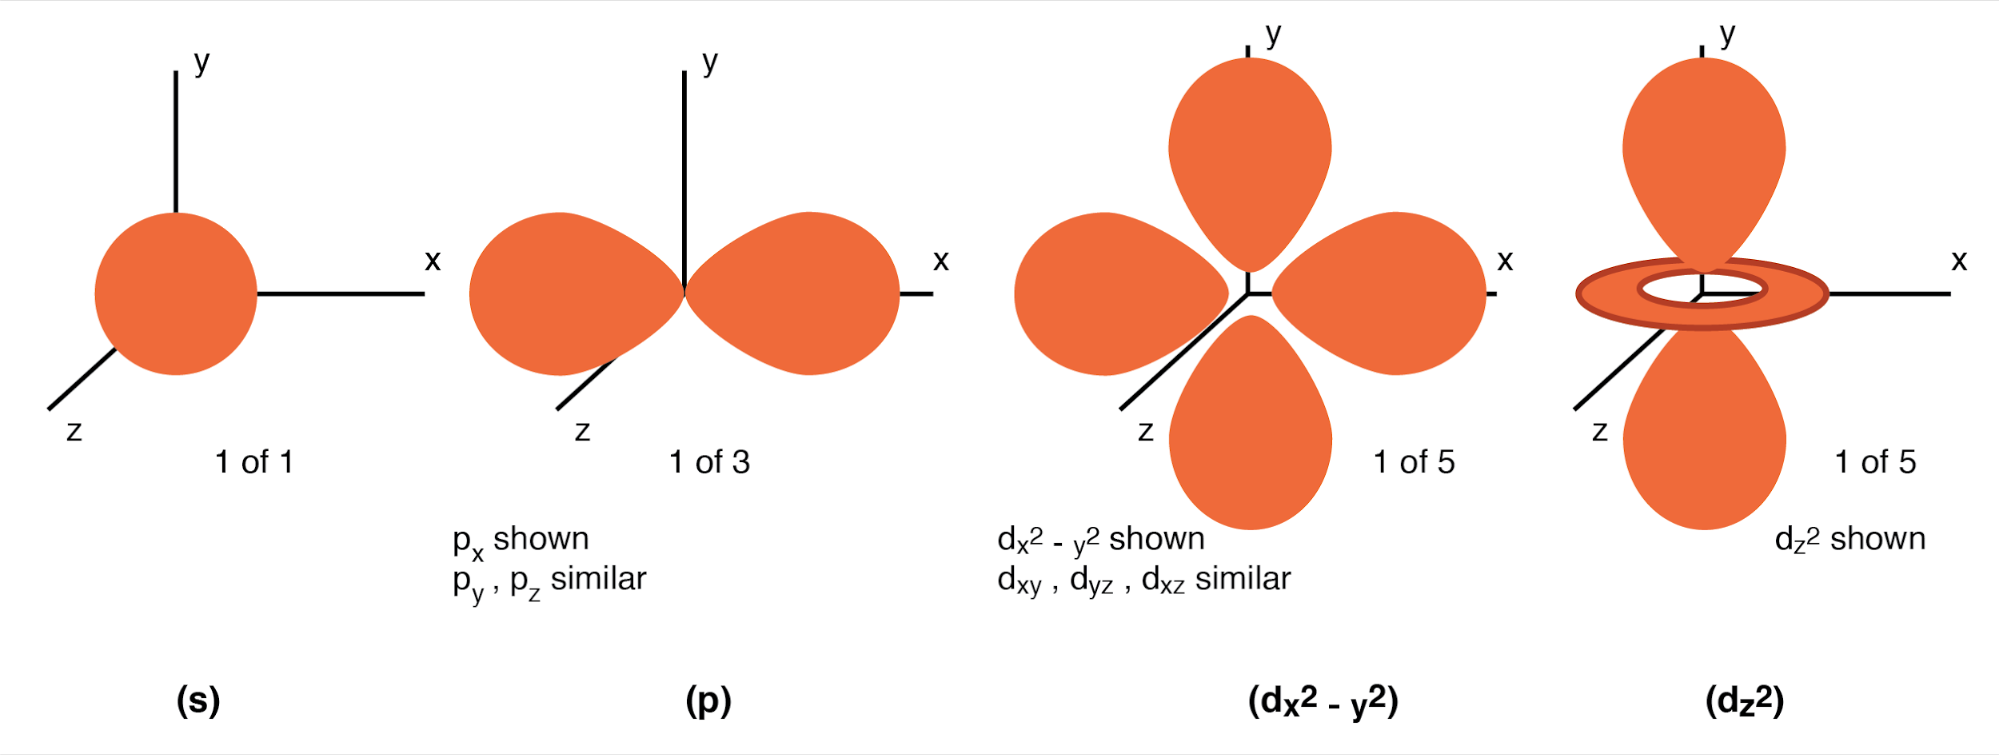 Orbitals: (s) Three fold symmetry. (p) Shown: px, one of three possible orientations (px, py, pz ), about their respective axes. (d) Shown: dx2-y2 similar to dxy, dyz, dxz. Shown: dz2. Possible d-orbital orientations: five. 